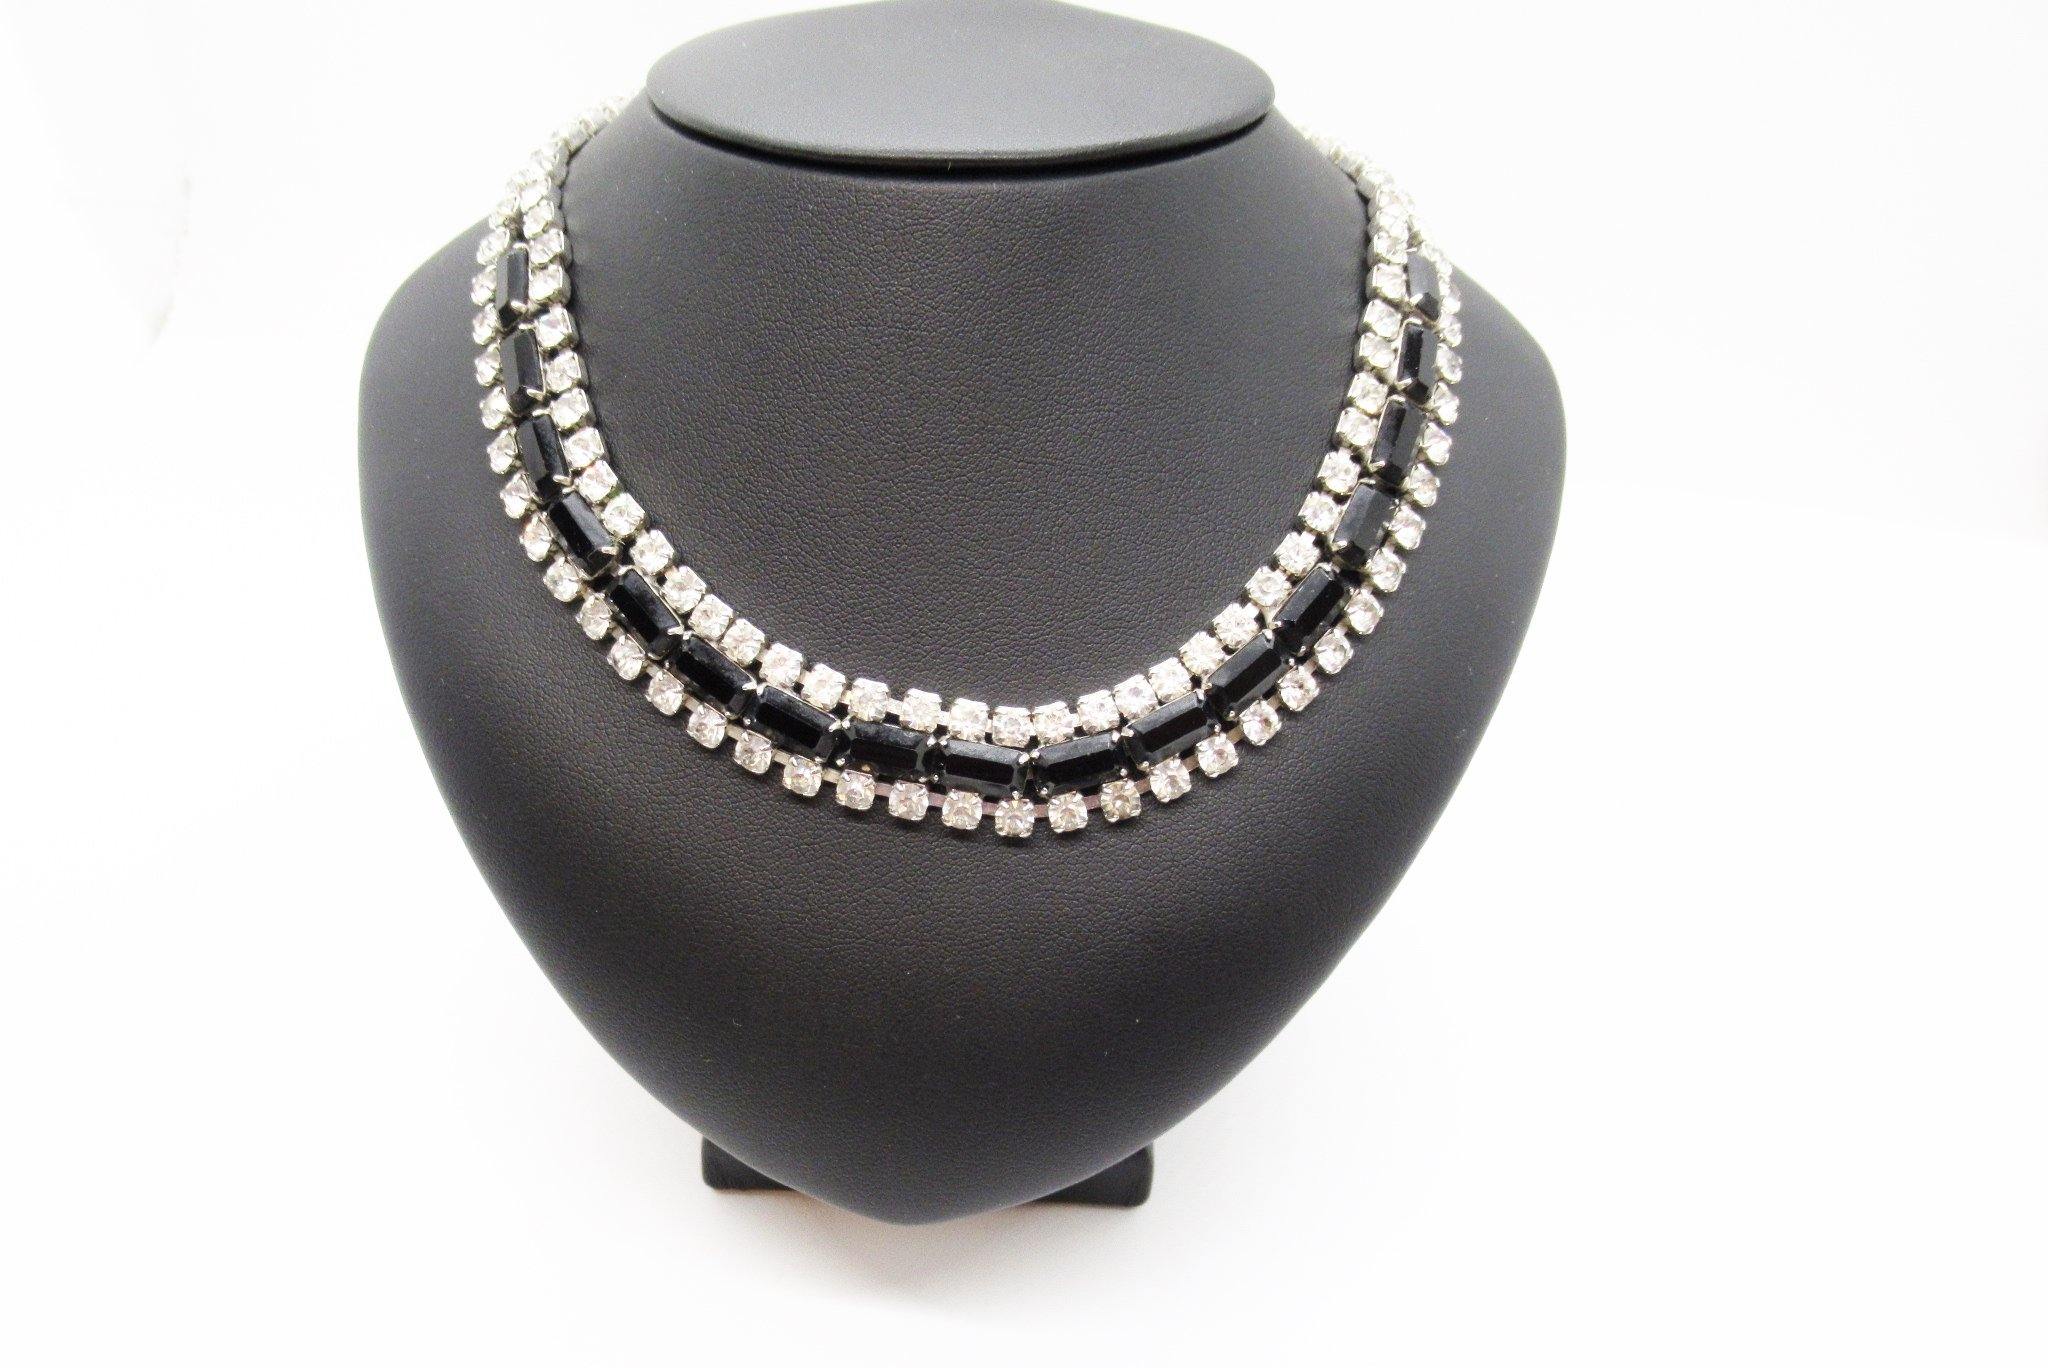 Vintage Evening Necklace with Black and White Rhinestones - Lamoree’s Vintage